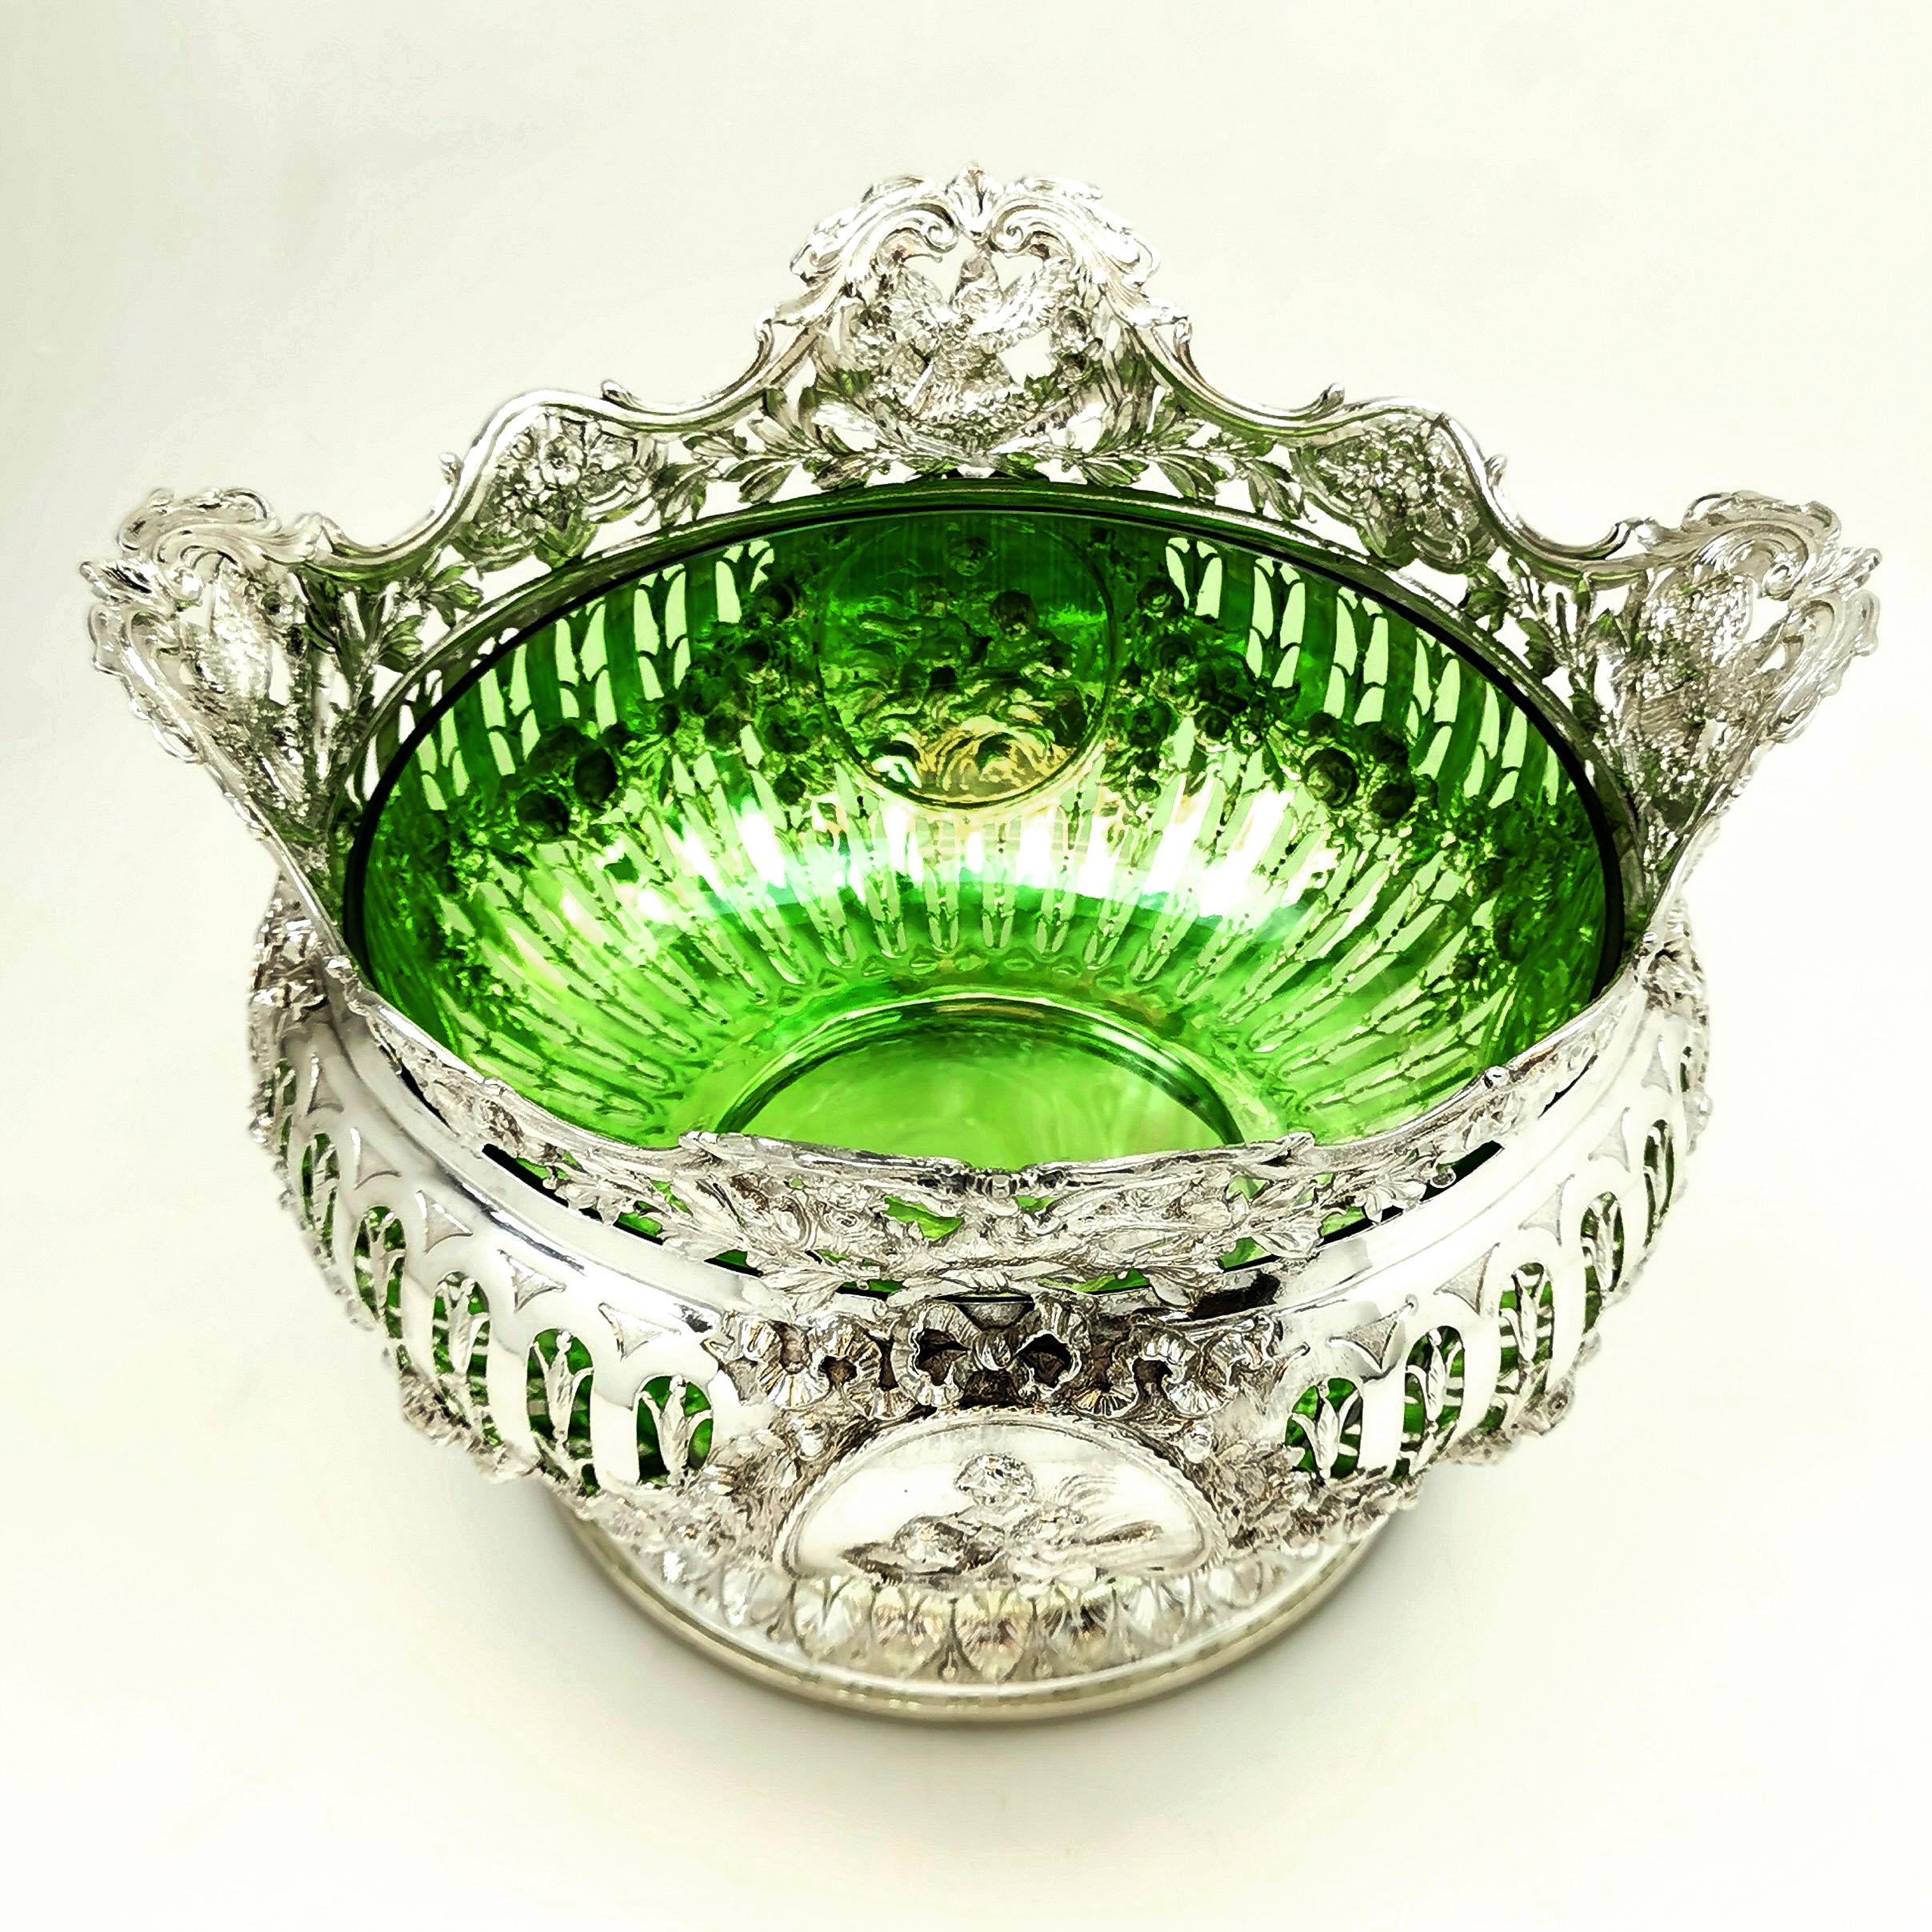 A beautiful antique German solid Silver Bowl with a fitted rich green glass liner. This Bowl has an ornate chased and pierced pattern allowing the green colour to shine through, although the Bowl could be used without the liner if desired. The Bowl